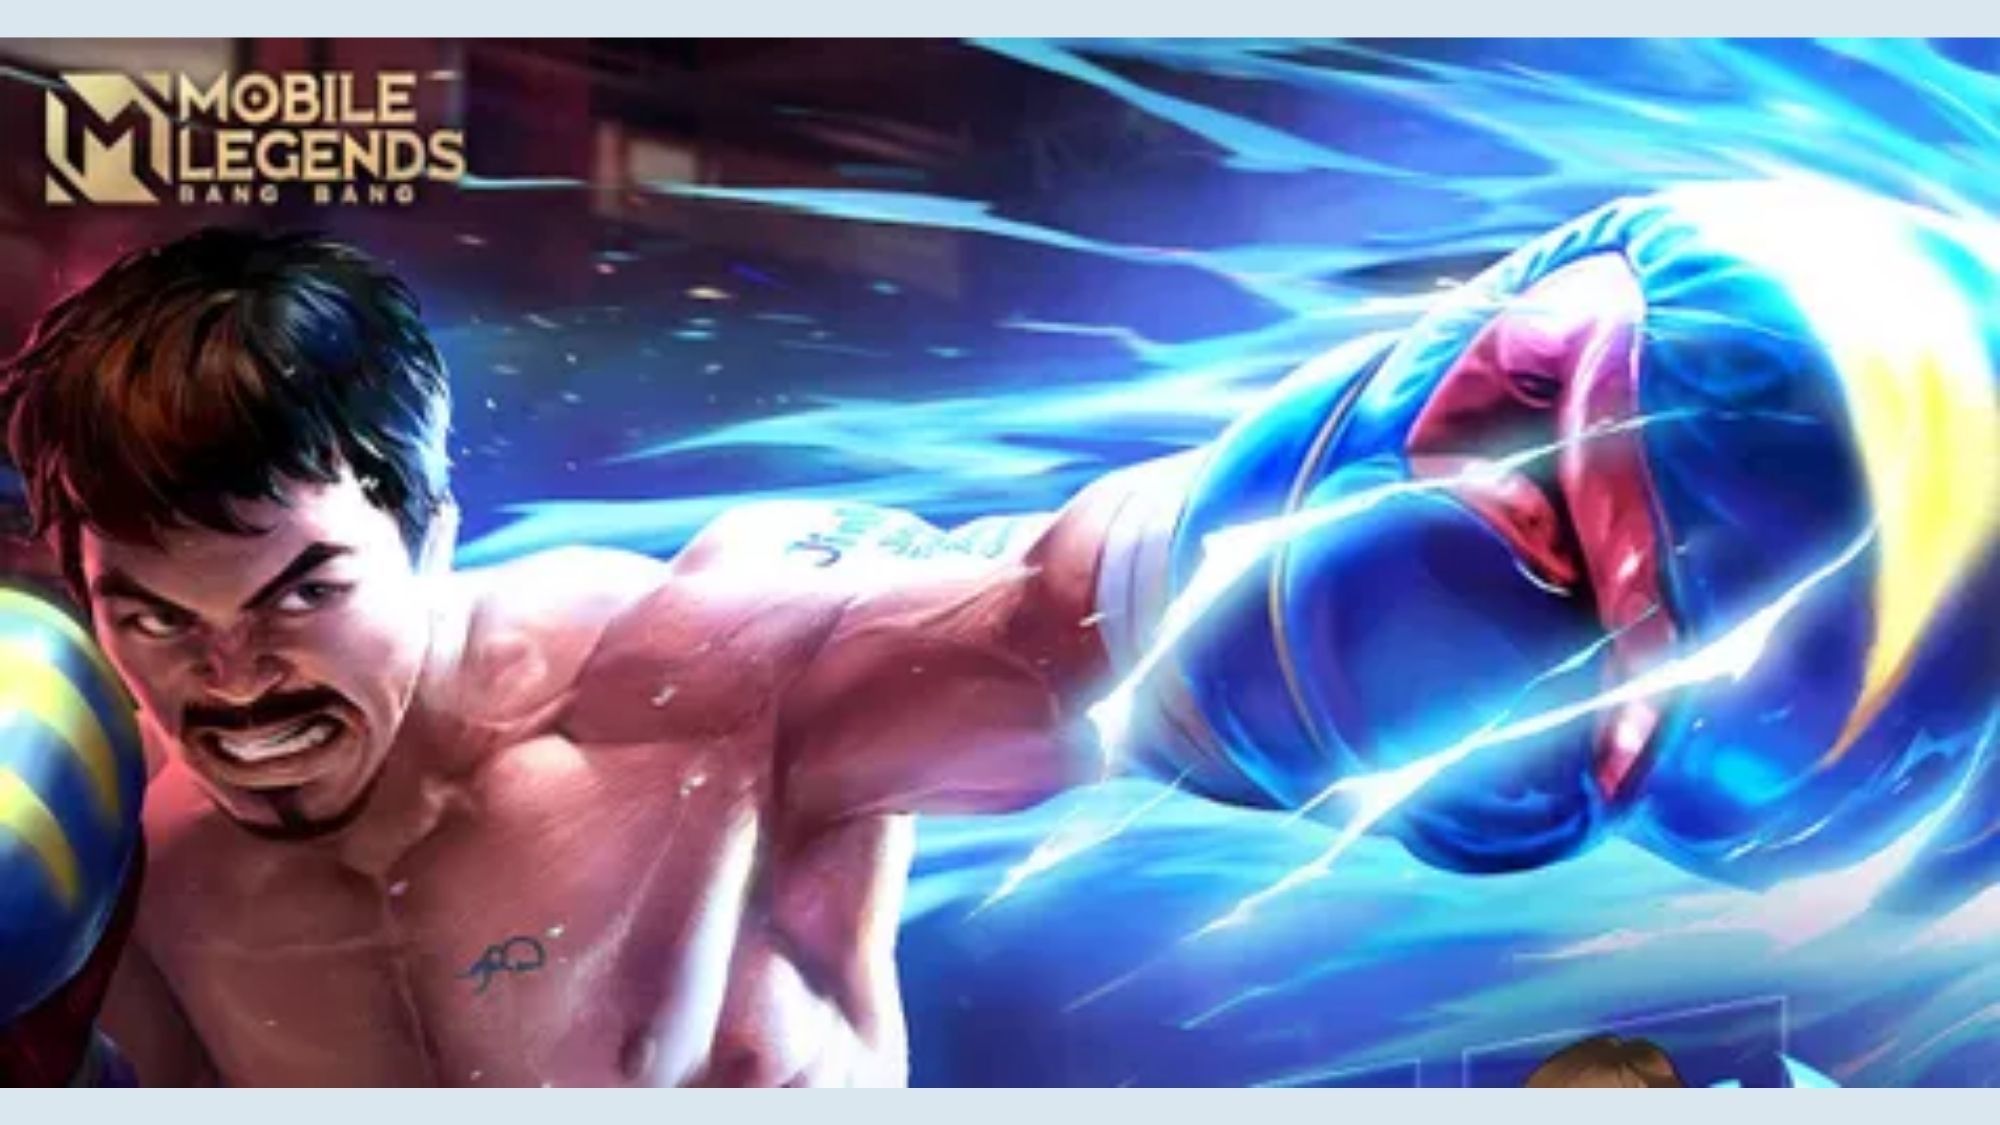  Mobile Legends reveals Manny Pacquiao Skin and Game Event